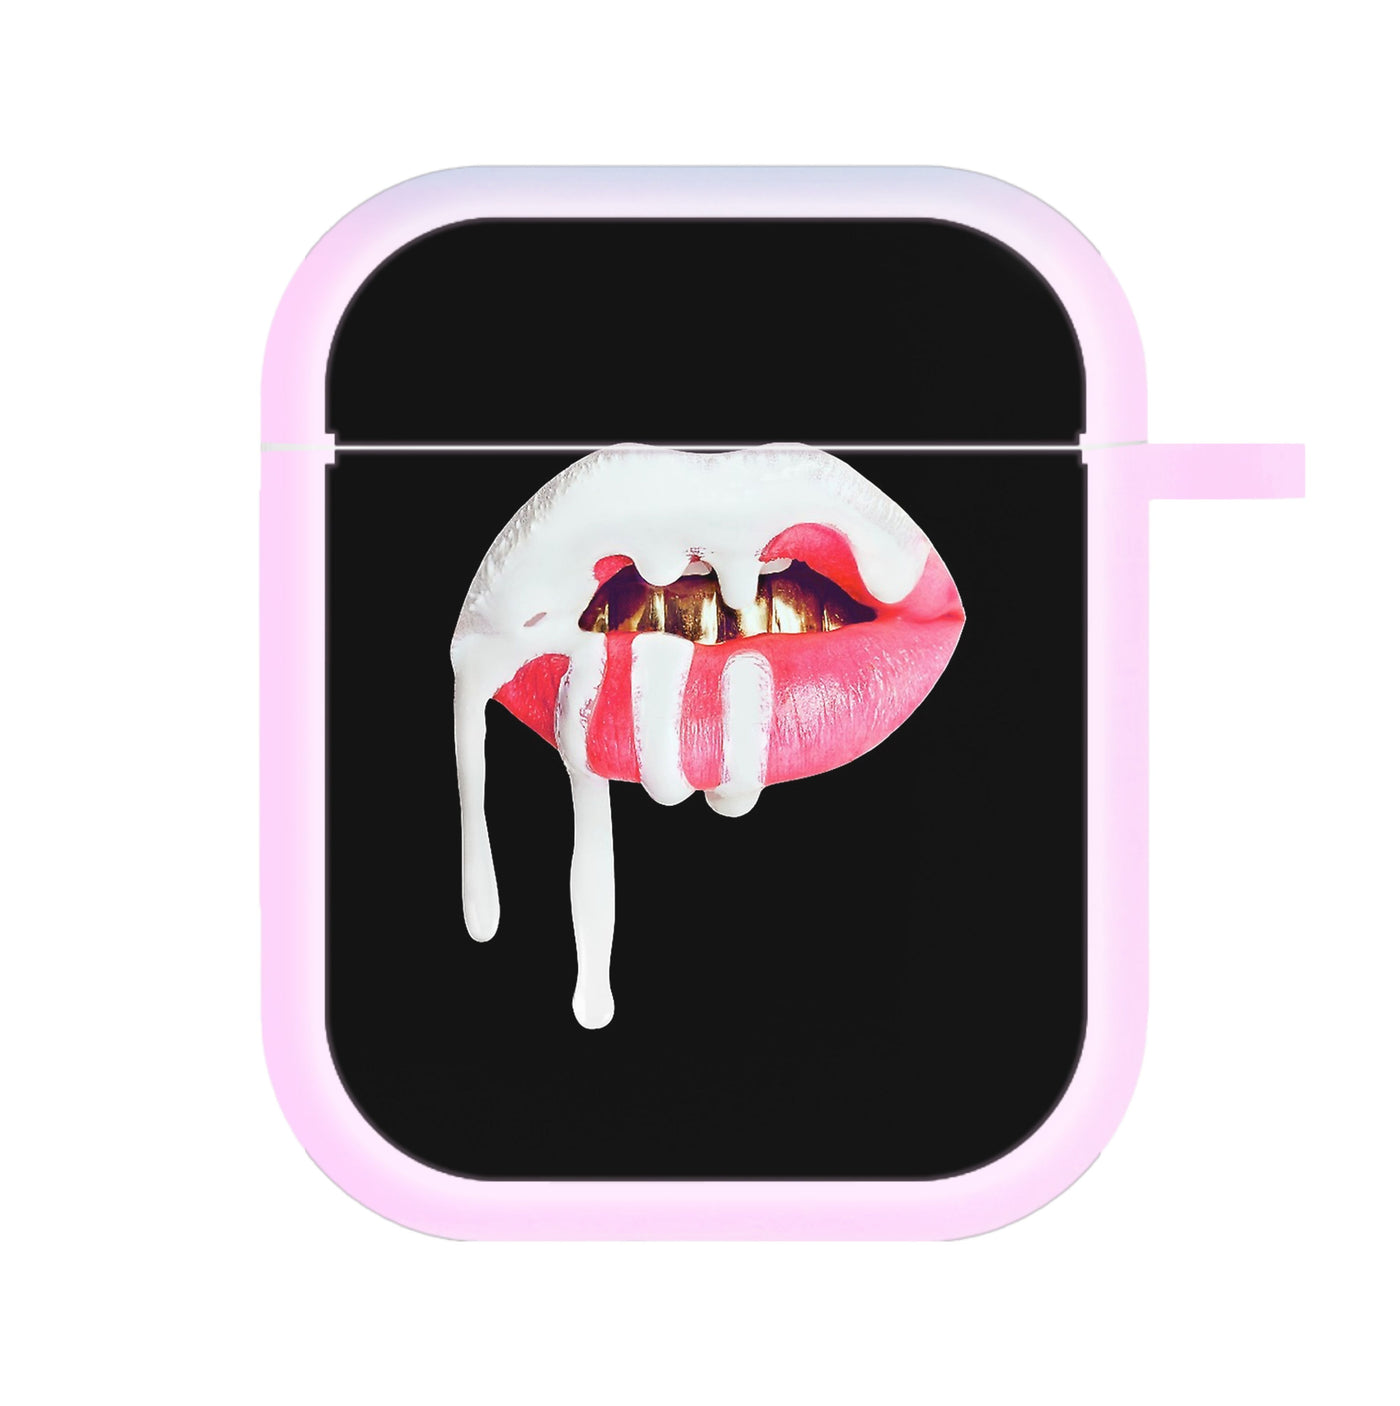 Kylie Jenner - White and Pink Lips AirPods Case